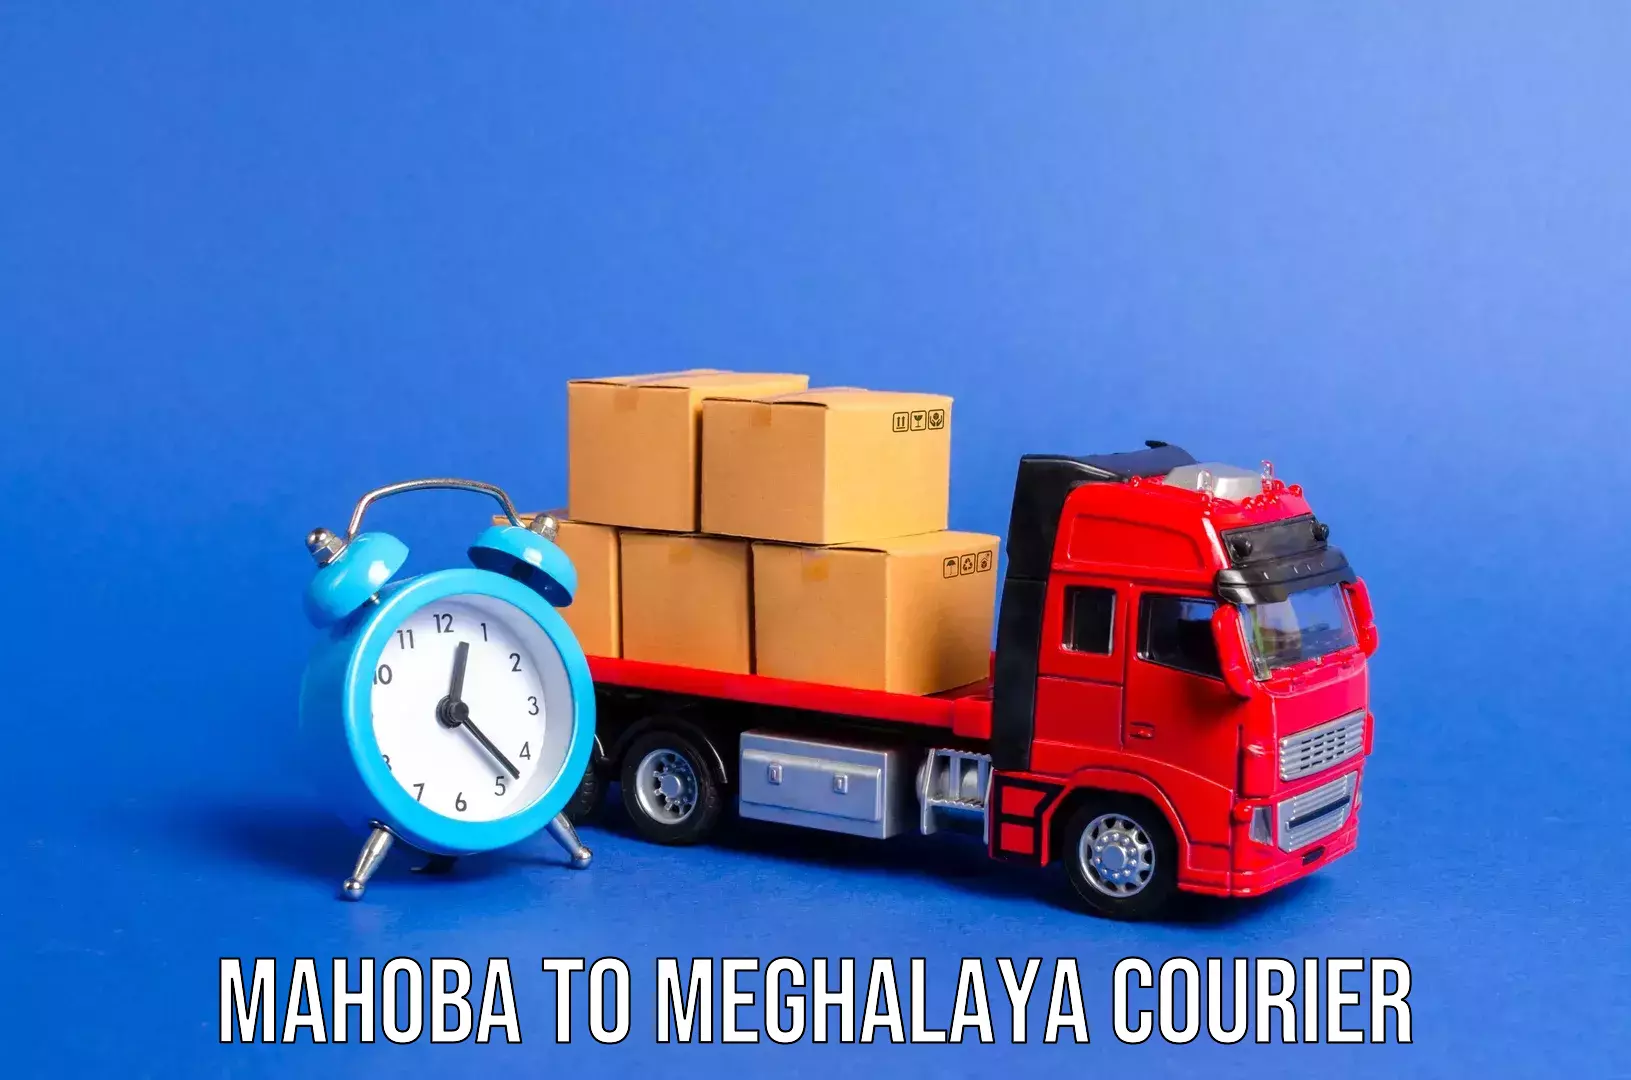 Luggage transport consulting Mahoba to Shillong